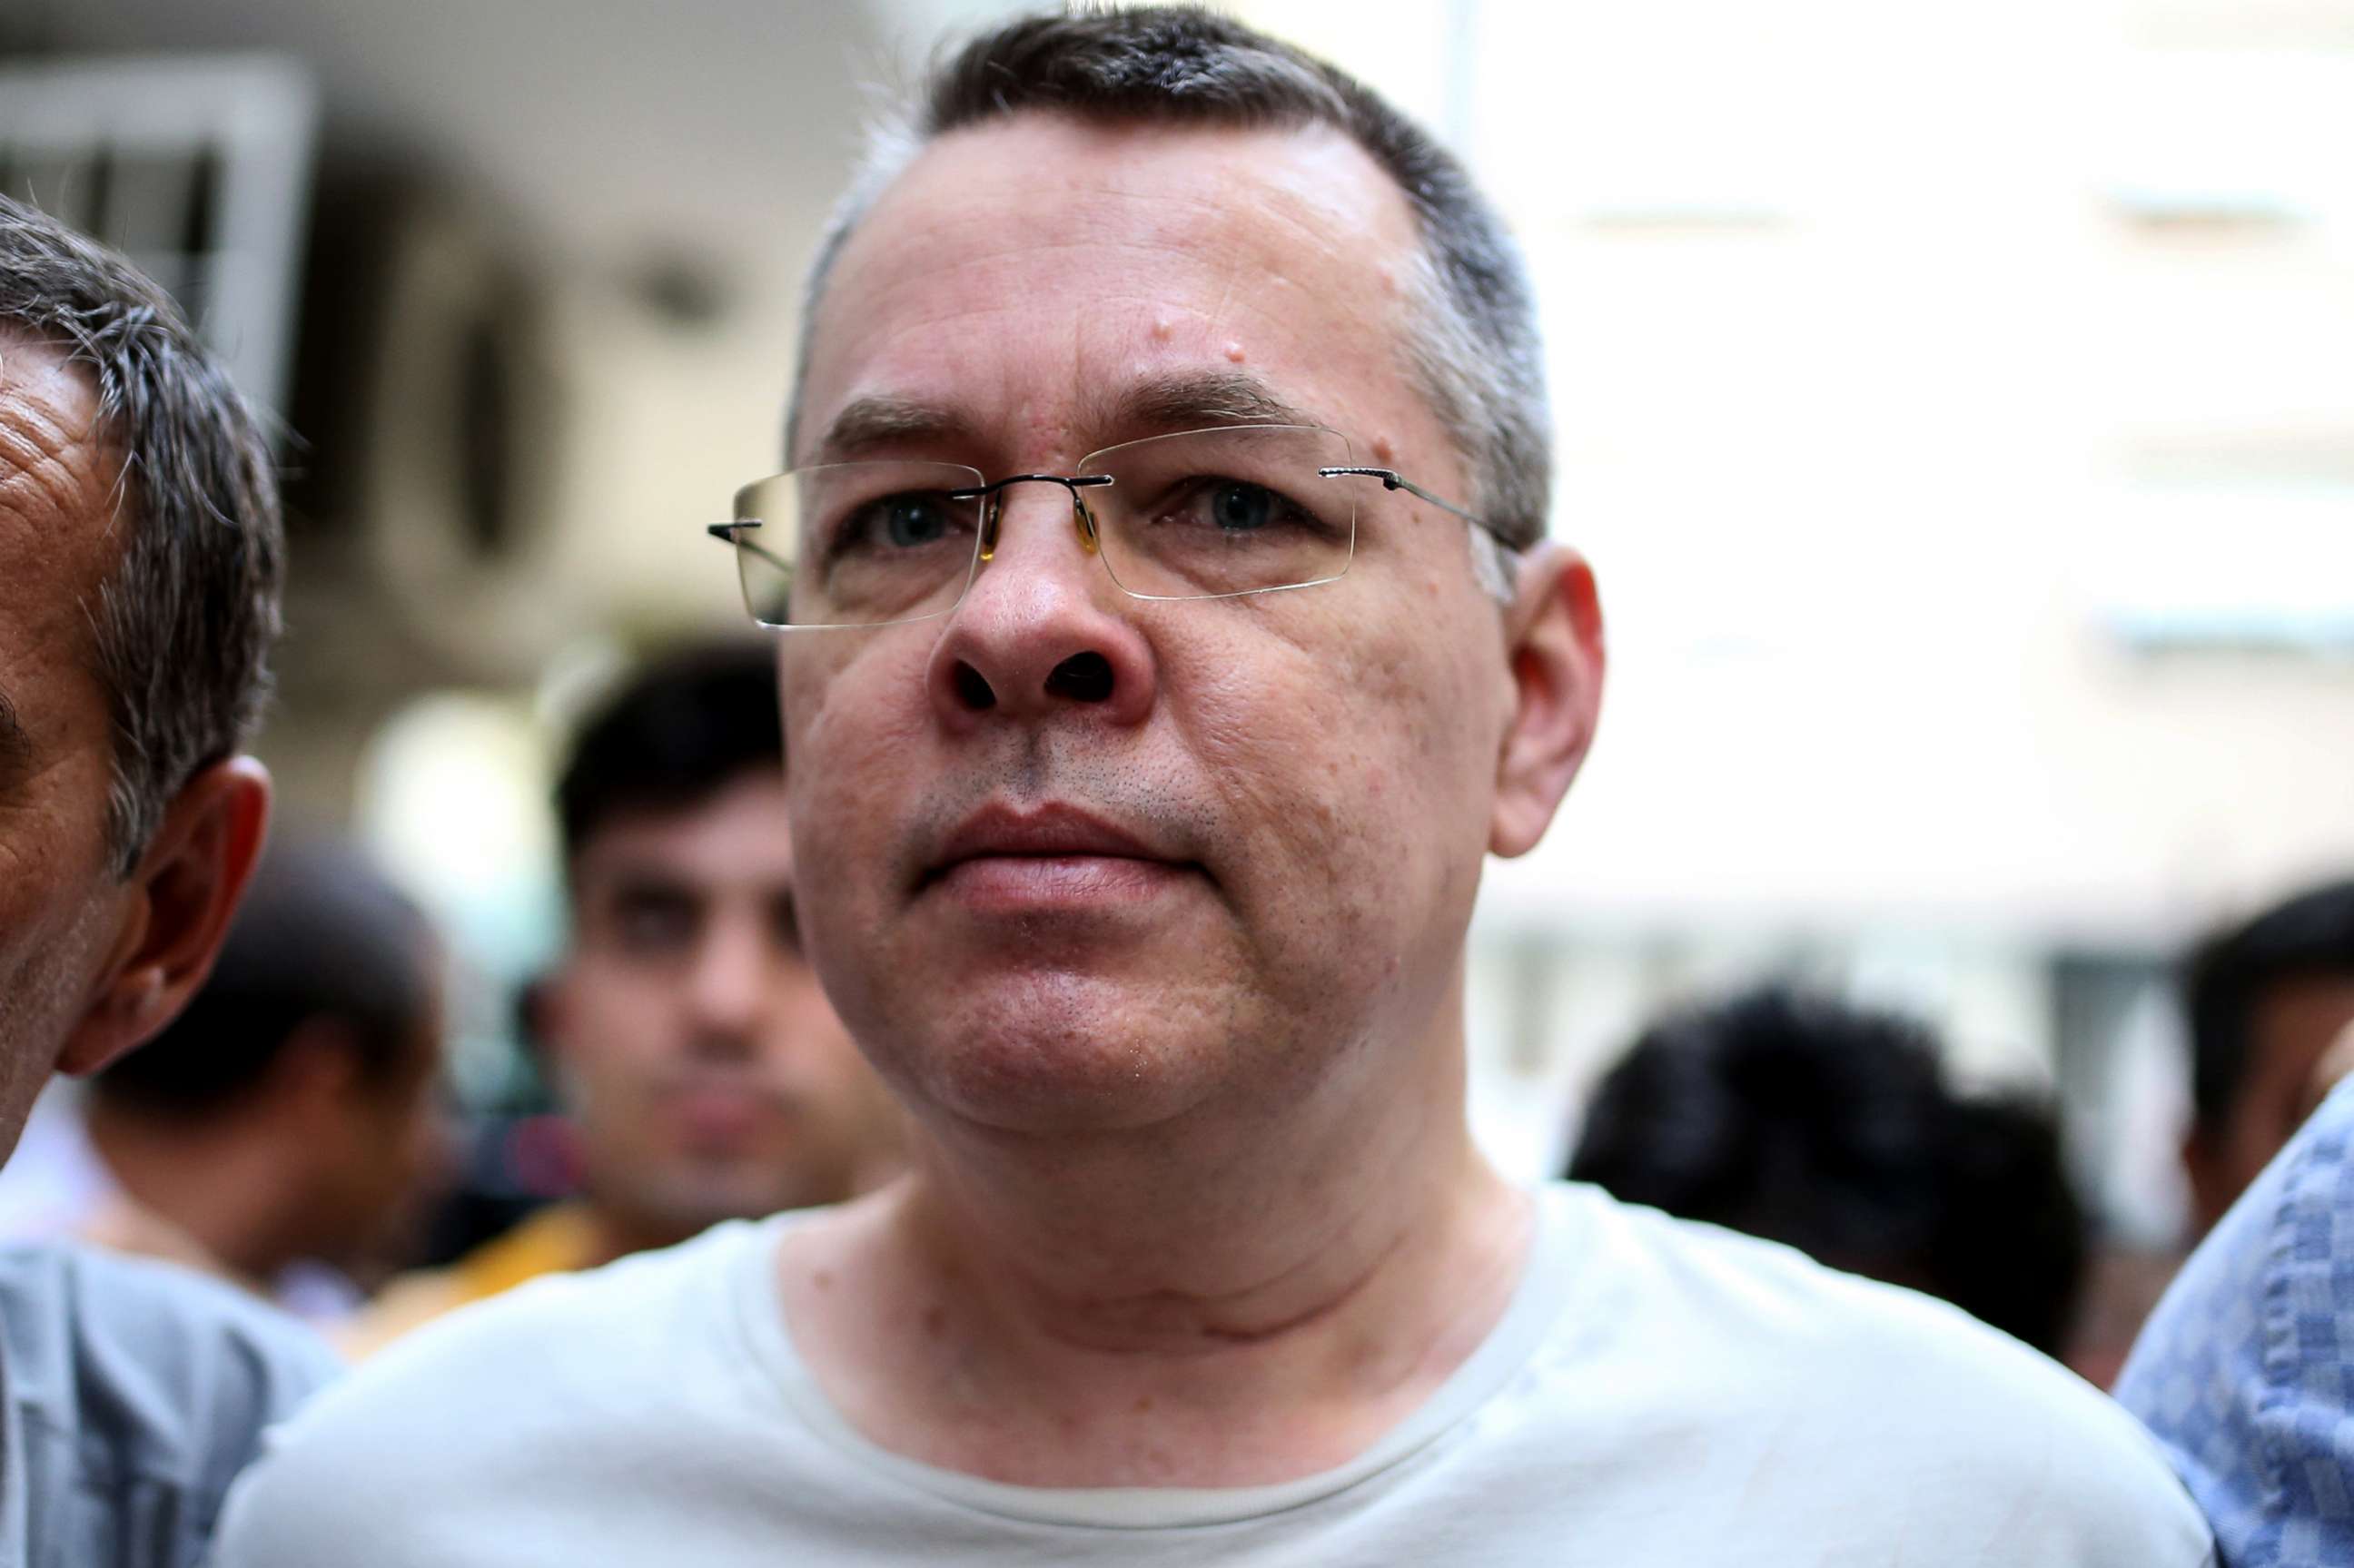 PHOTO: Andrew Craig Brunson is escorted by Turkish plain clothes police officers, July 25, 2018, in Izmir, Turkey.